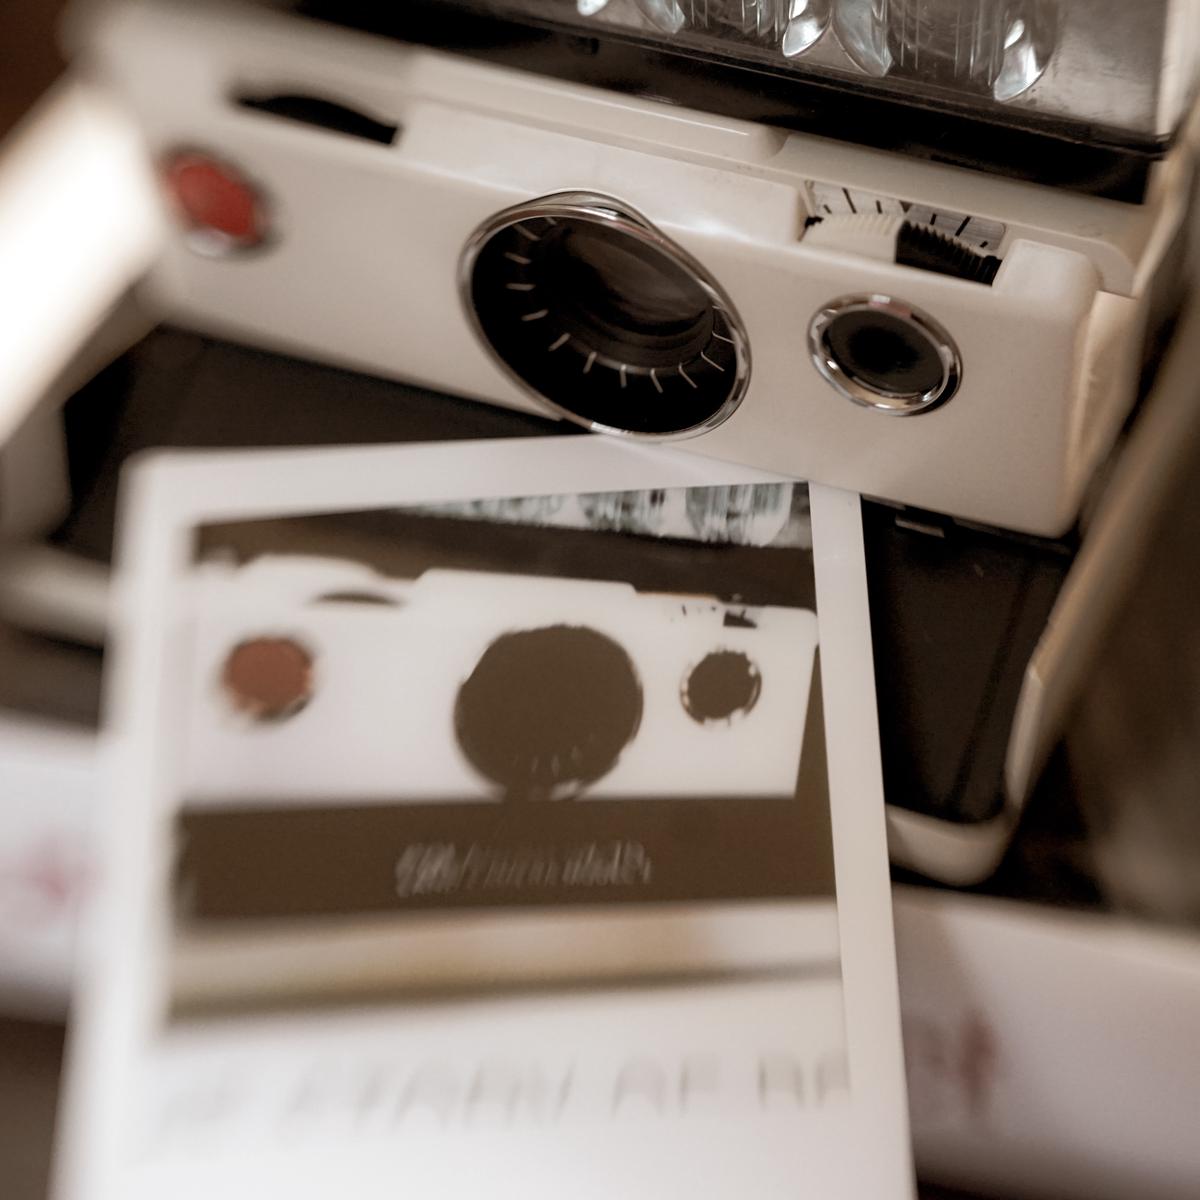 Image of a Polaroid SX 70 camera from the 1970s showcasing its iconic chrome and leather design, collapsible SLR viewfinder, and unique instant film format.